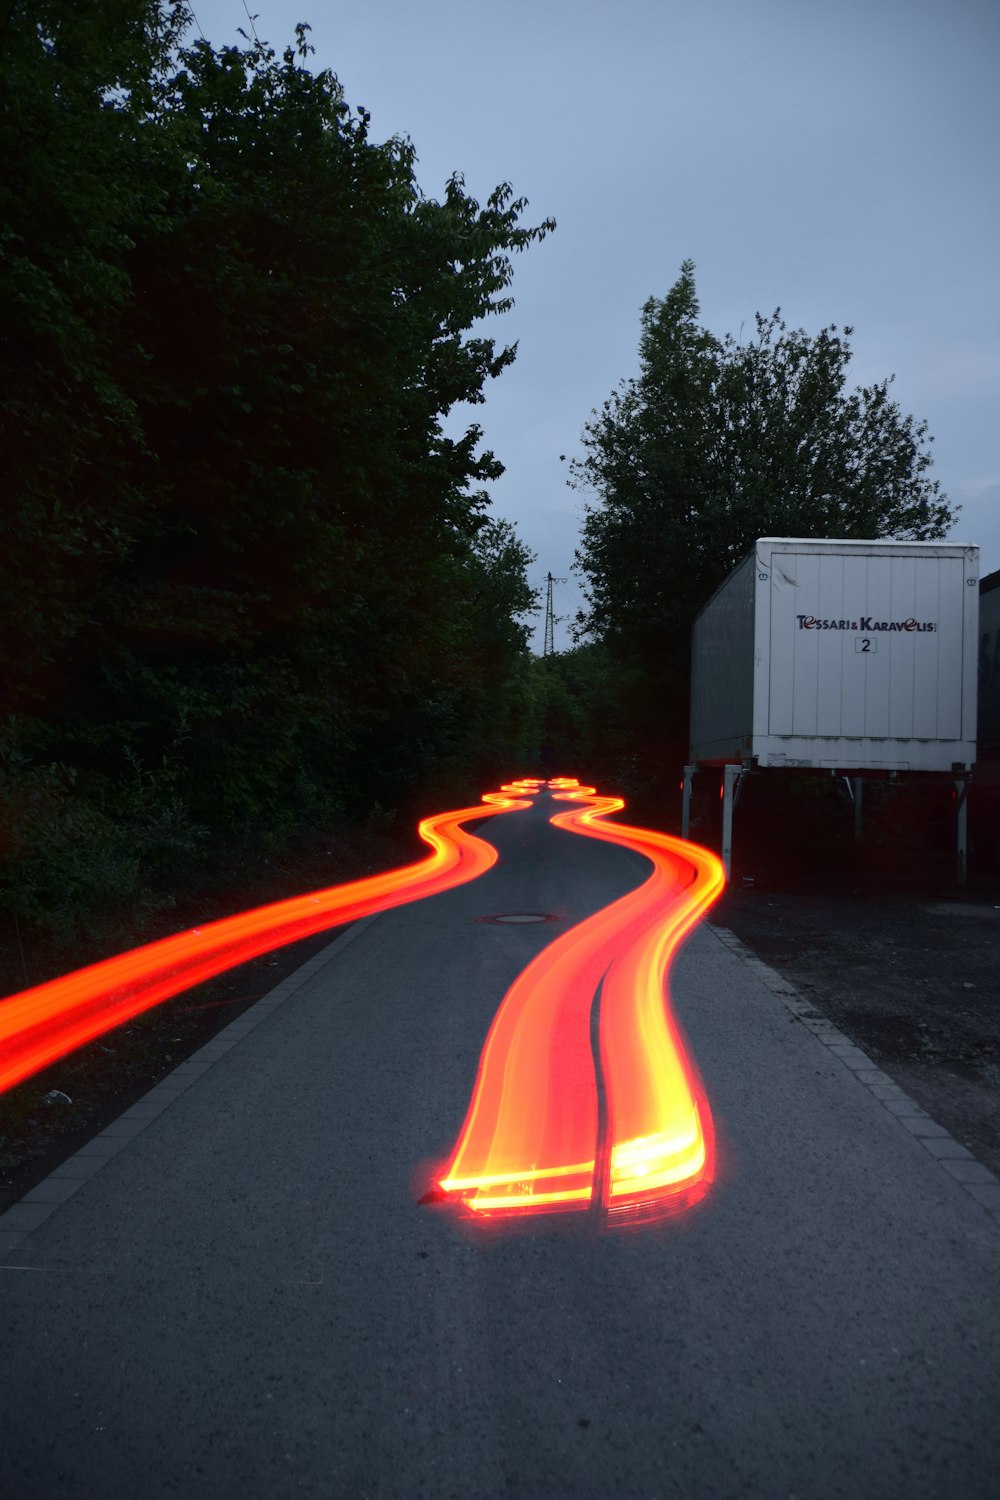 a long exposure photo of a road with red lights